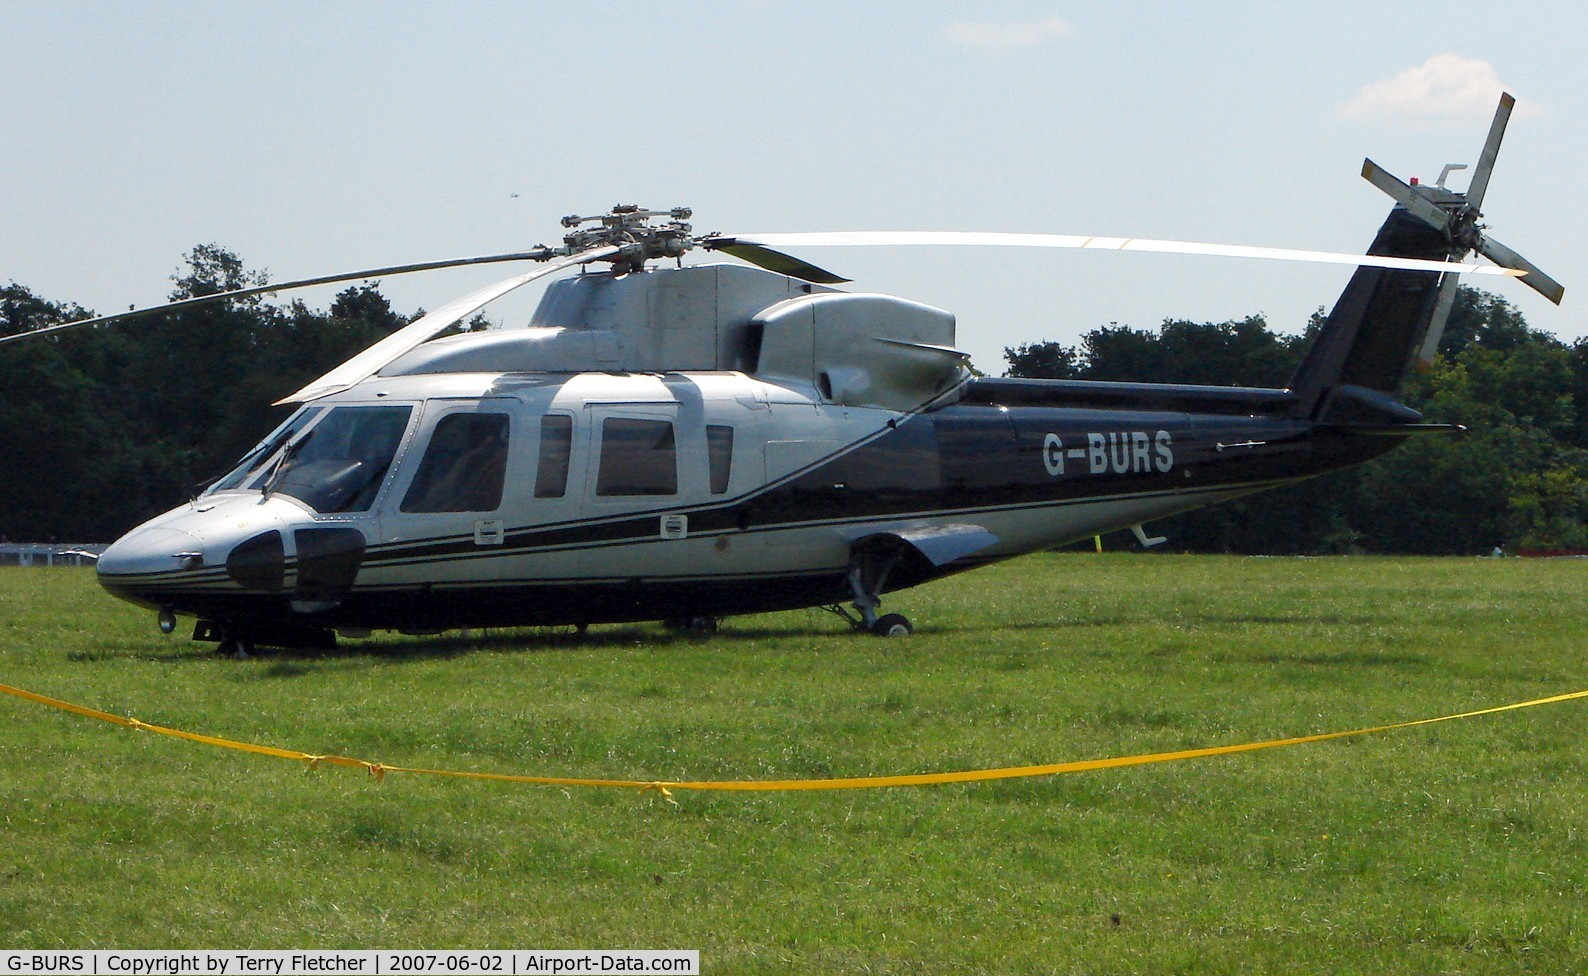 G-BURS, 1980 Sikorsky S-76A C/N 760040, Helicopters arrive at the temporary Heliport on 2007 Epsom Derby Day (Horse racing)